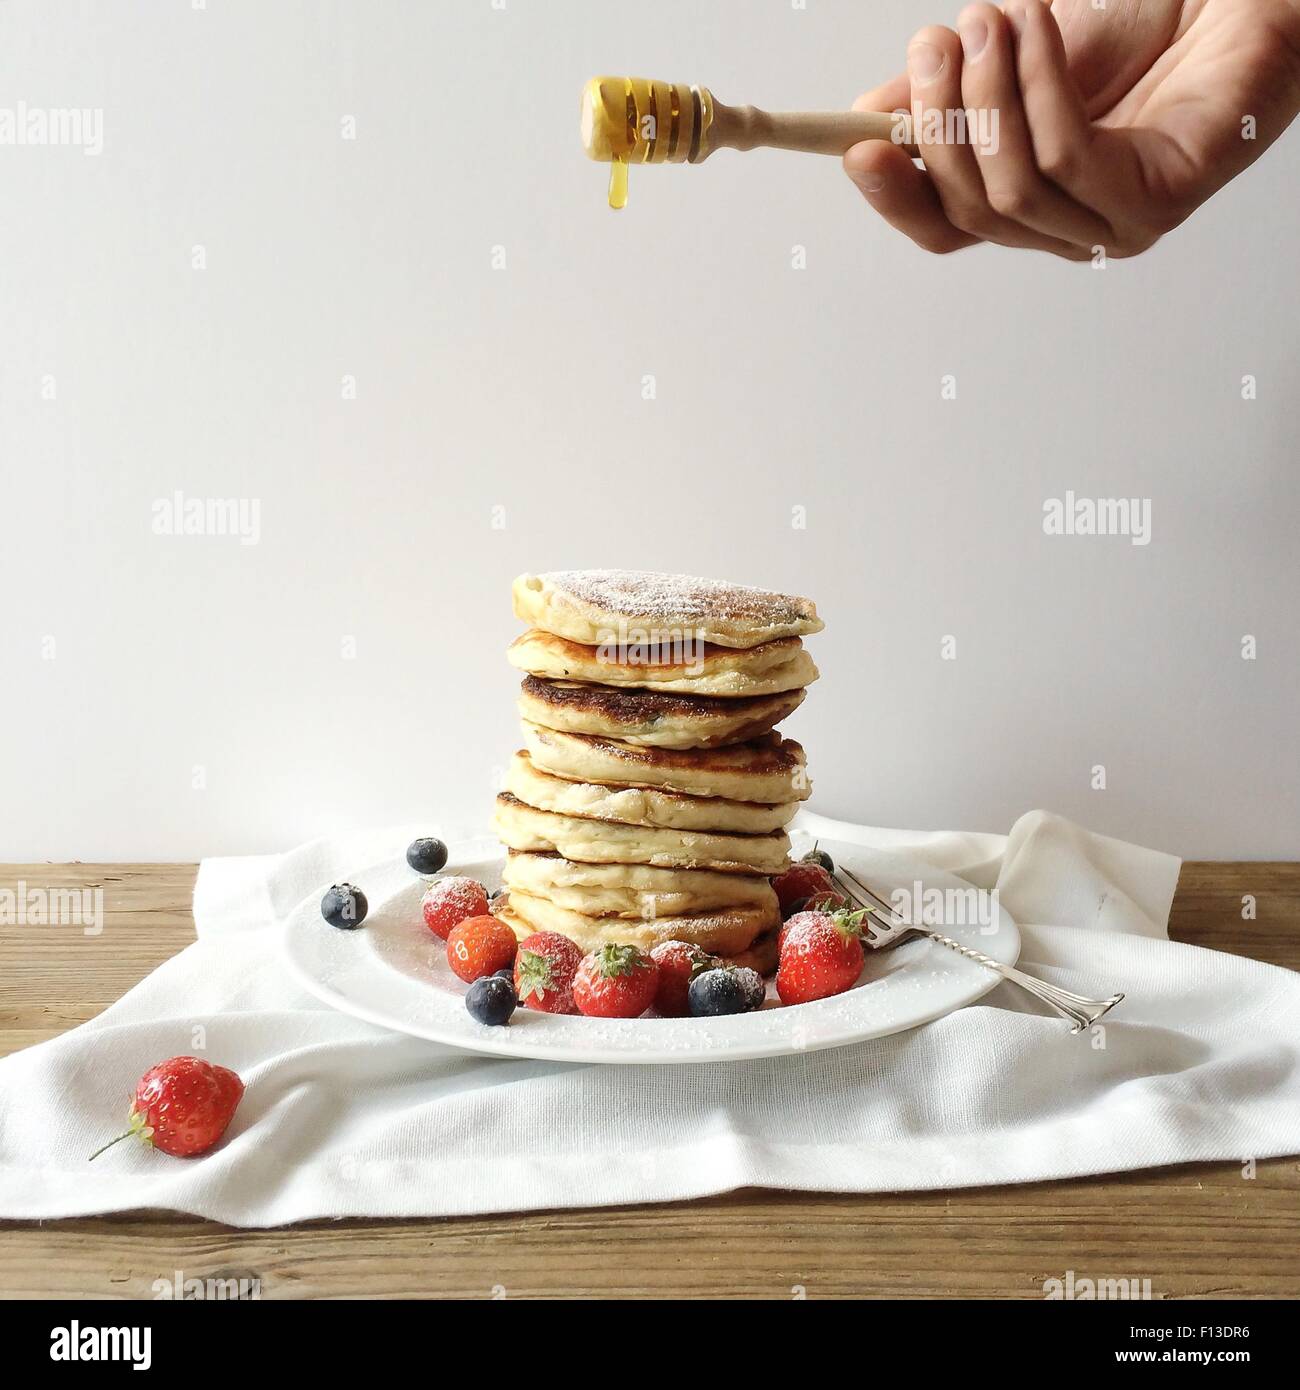 and photography Alamy made stock - images hi-res Ready pancakes